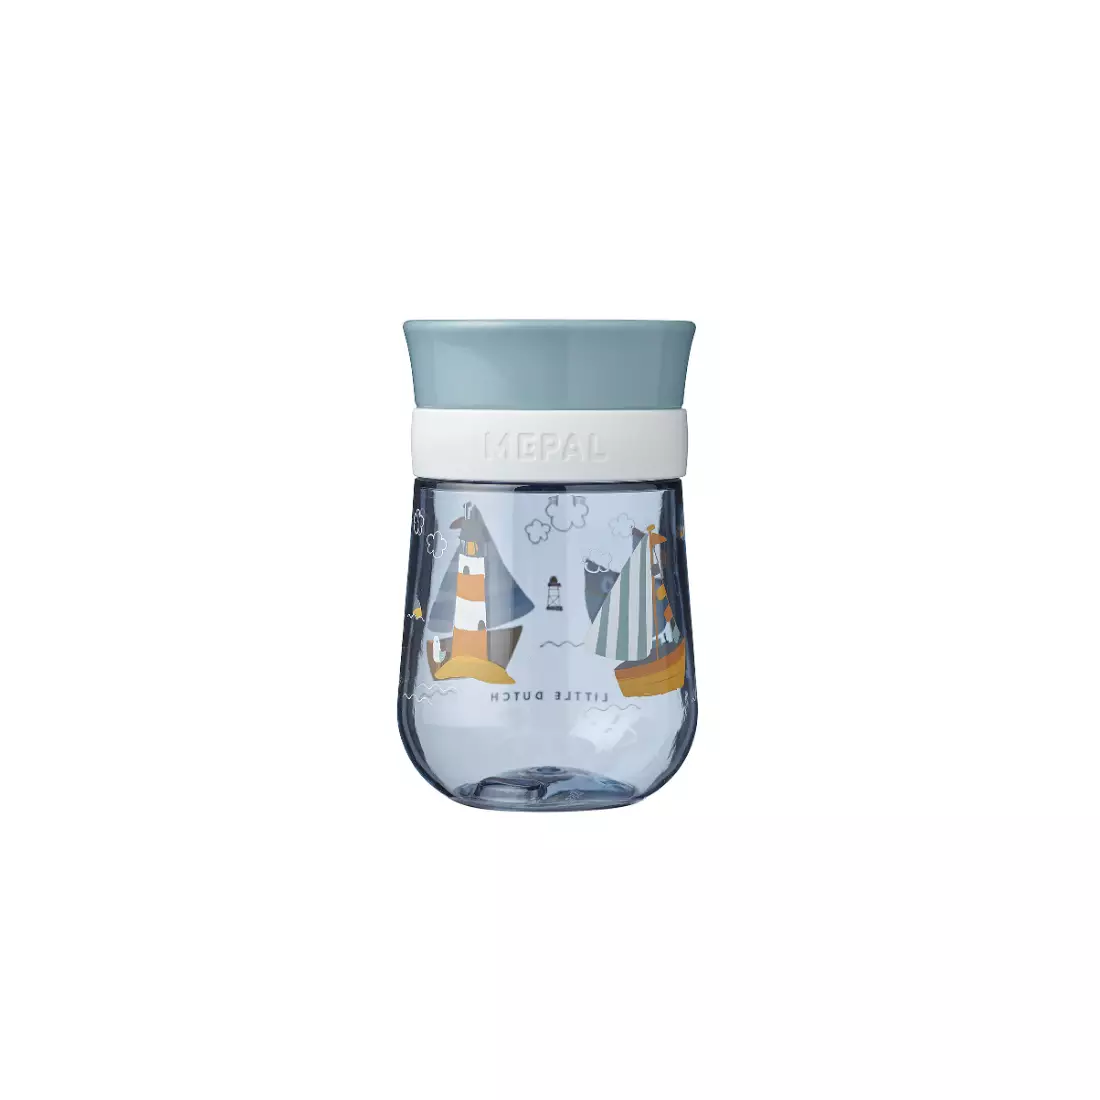 MEPAL MIO training cup for children 300 ml, sailors bay